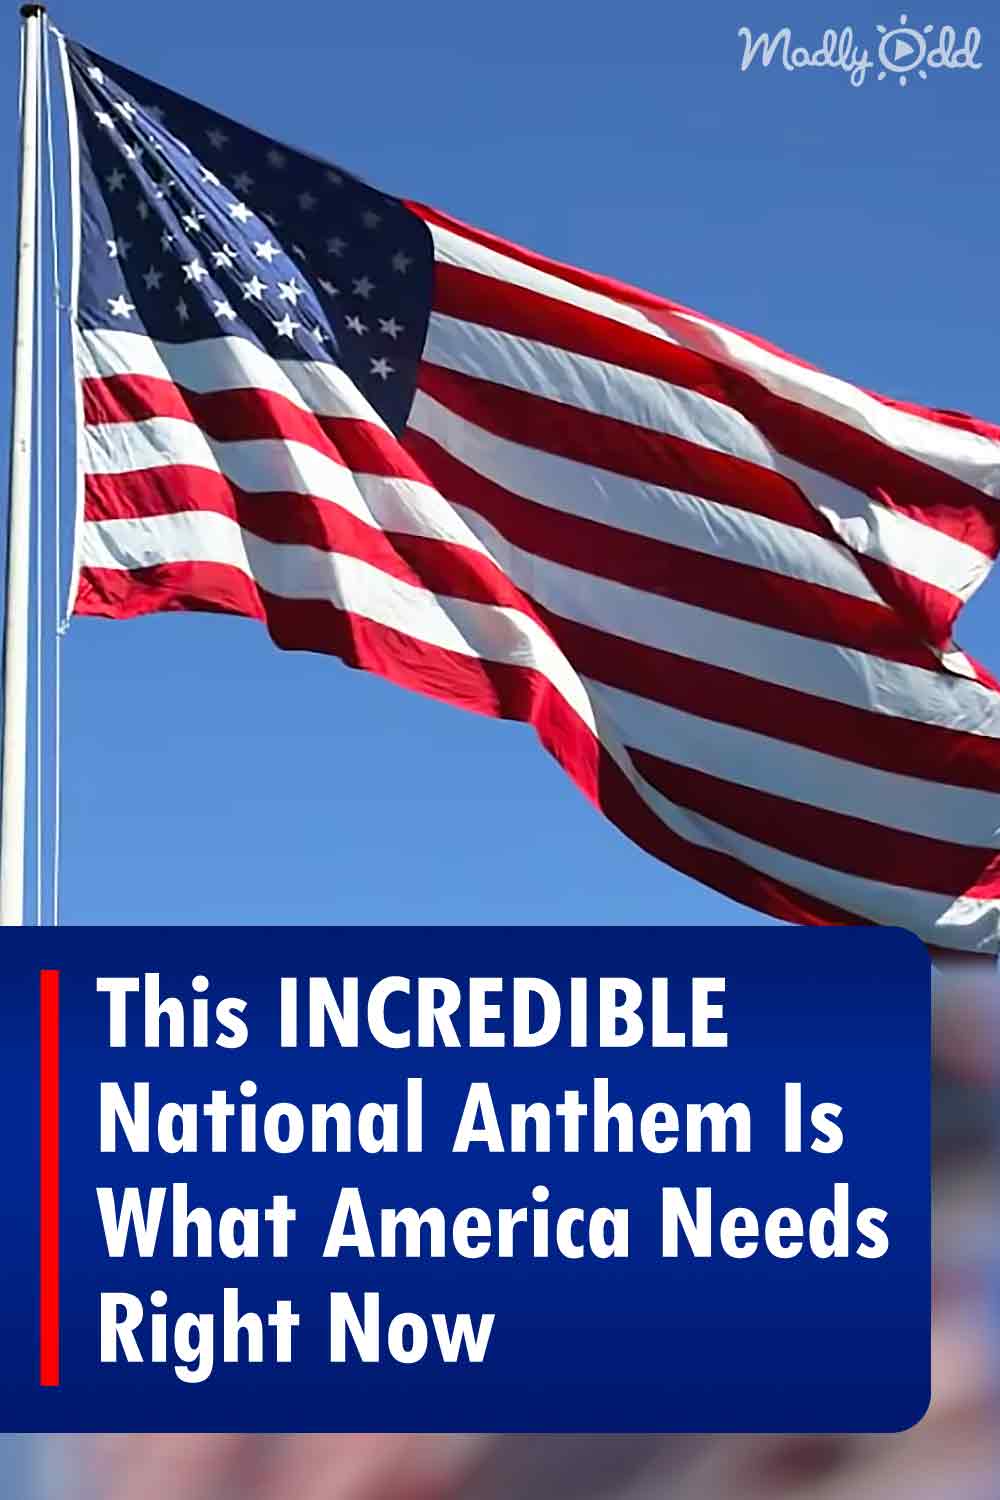 This INCREDIBLE National Anthem Is What America Needs Right Now